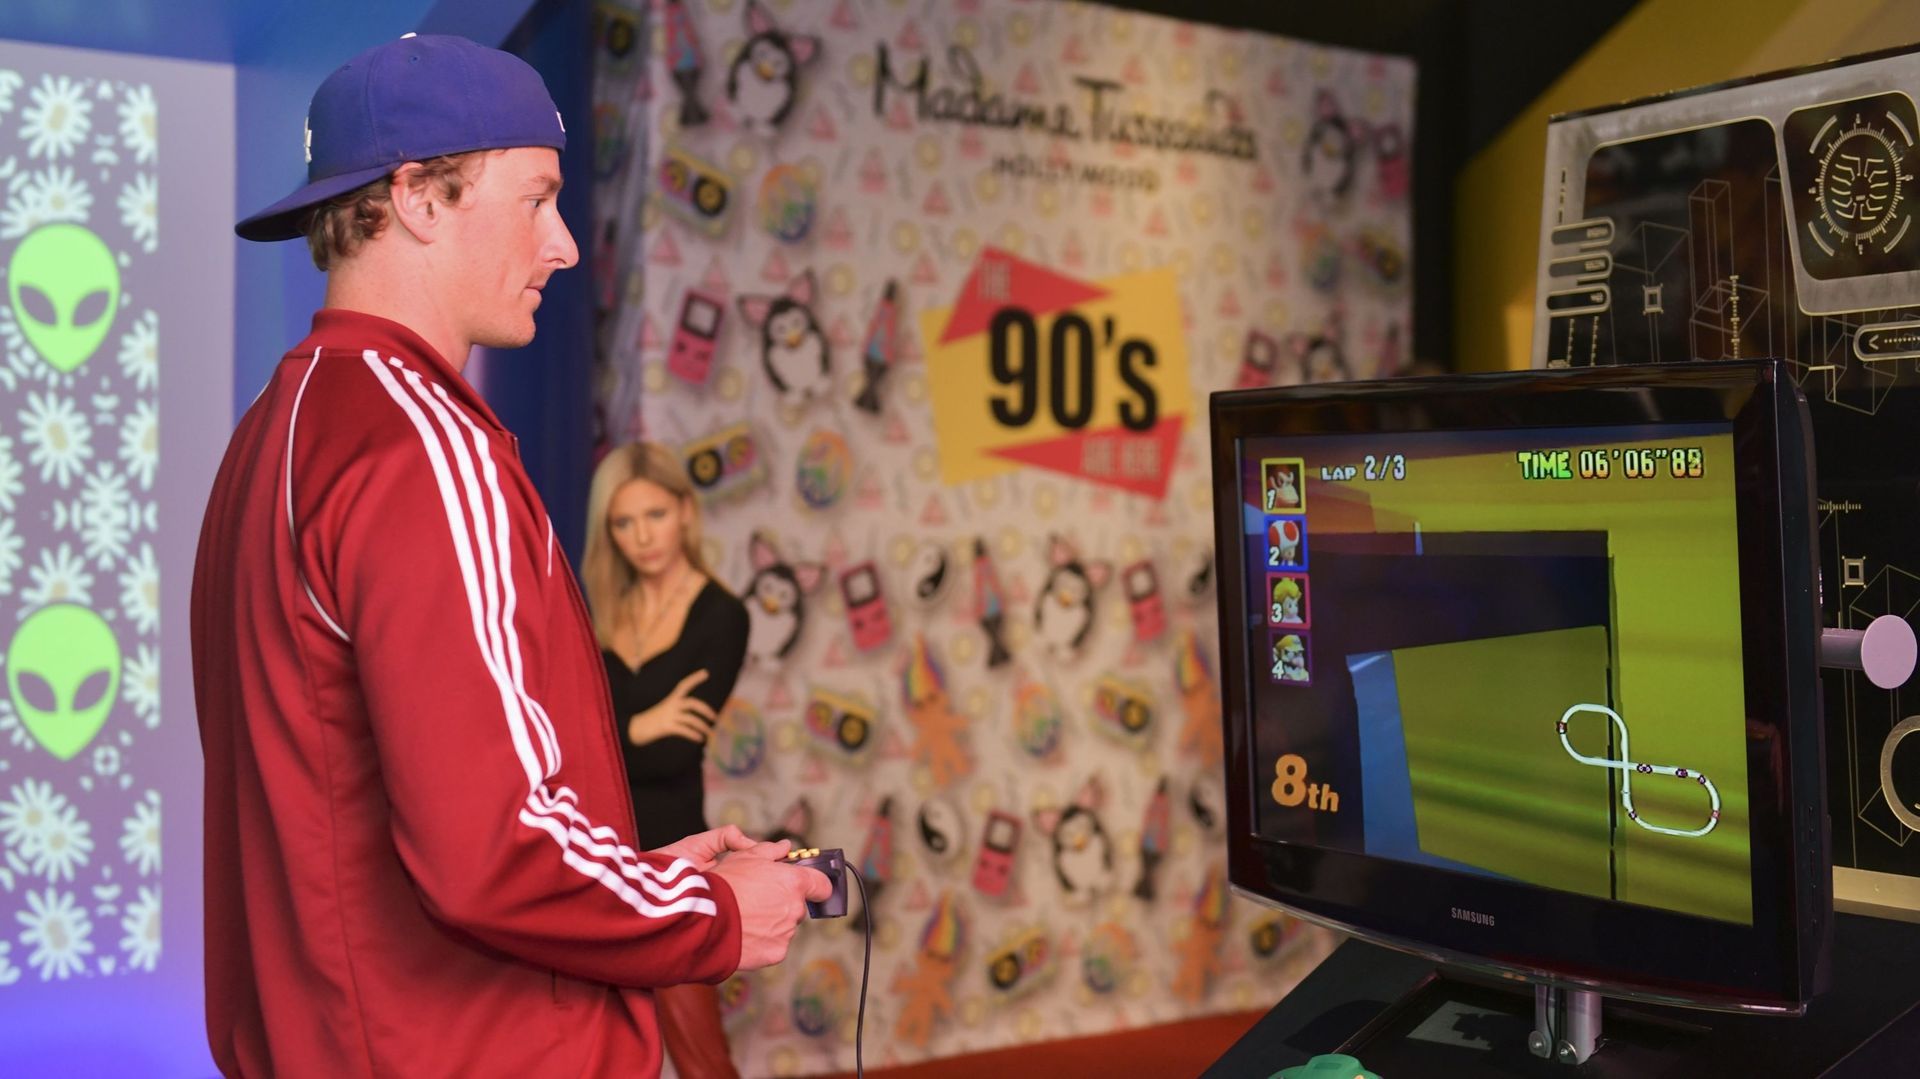 Madame Tussauds Hollywood Welcomes Tom Green To Unveil New '90s Room Launch